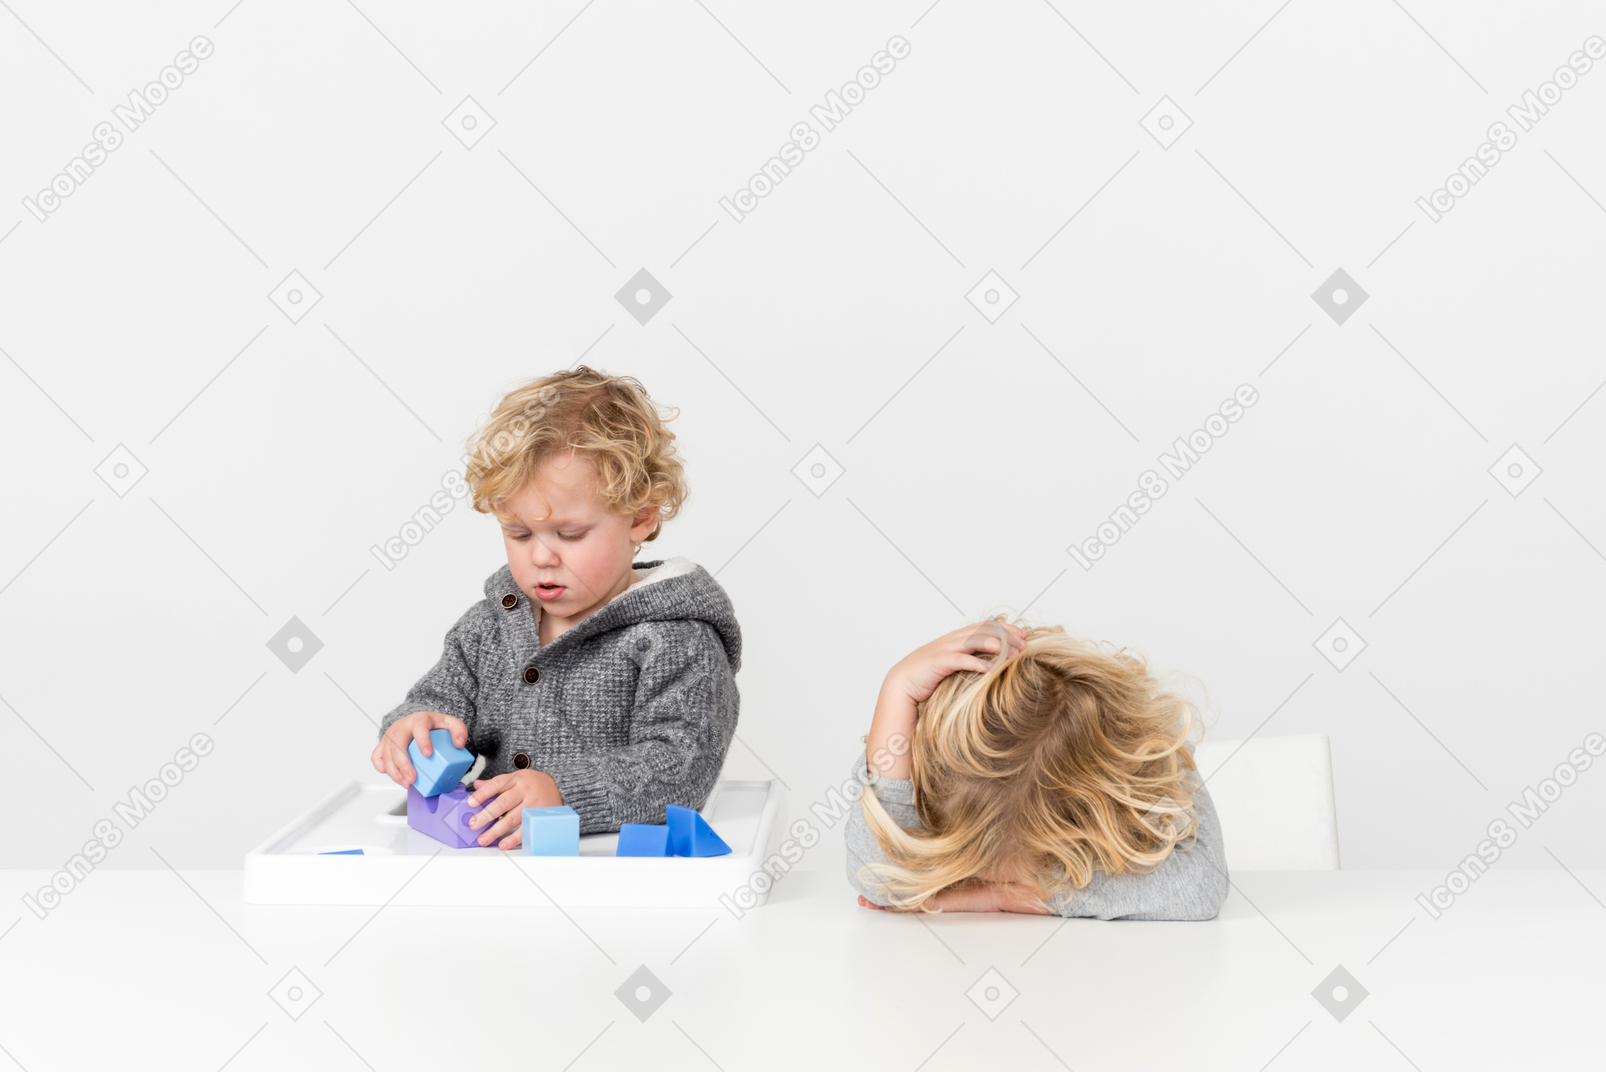 Little boy playing with toy blocks with his brother beside him